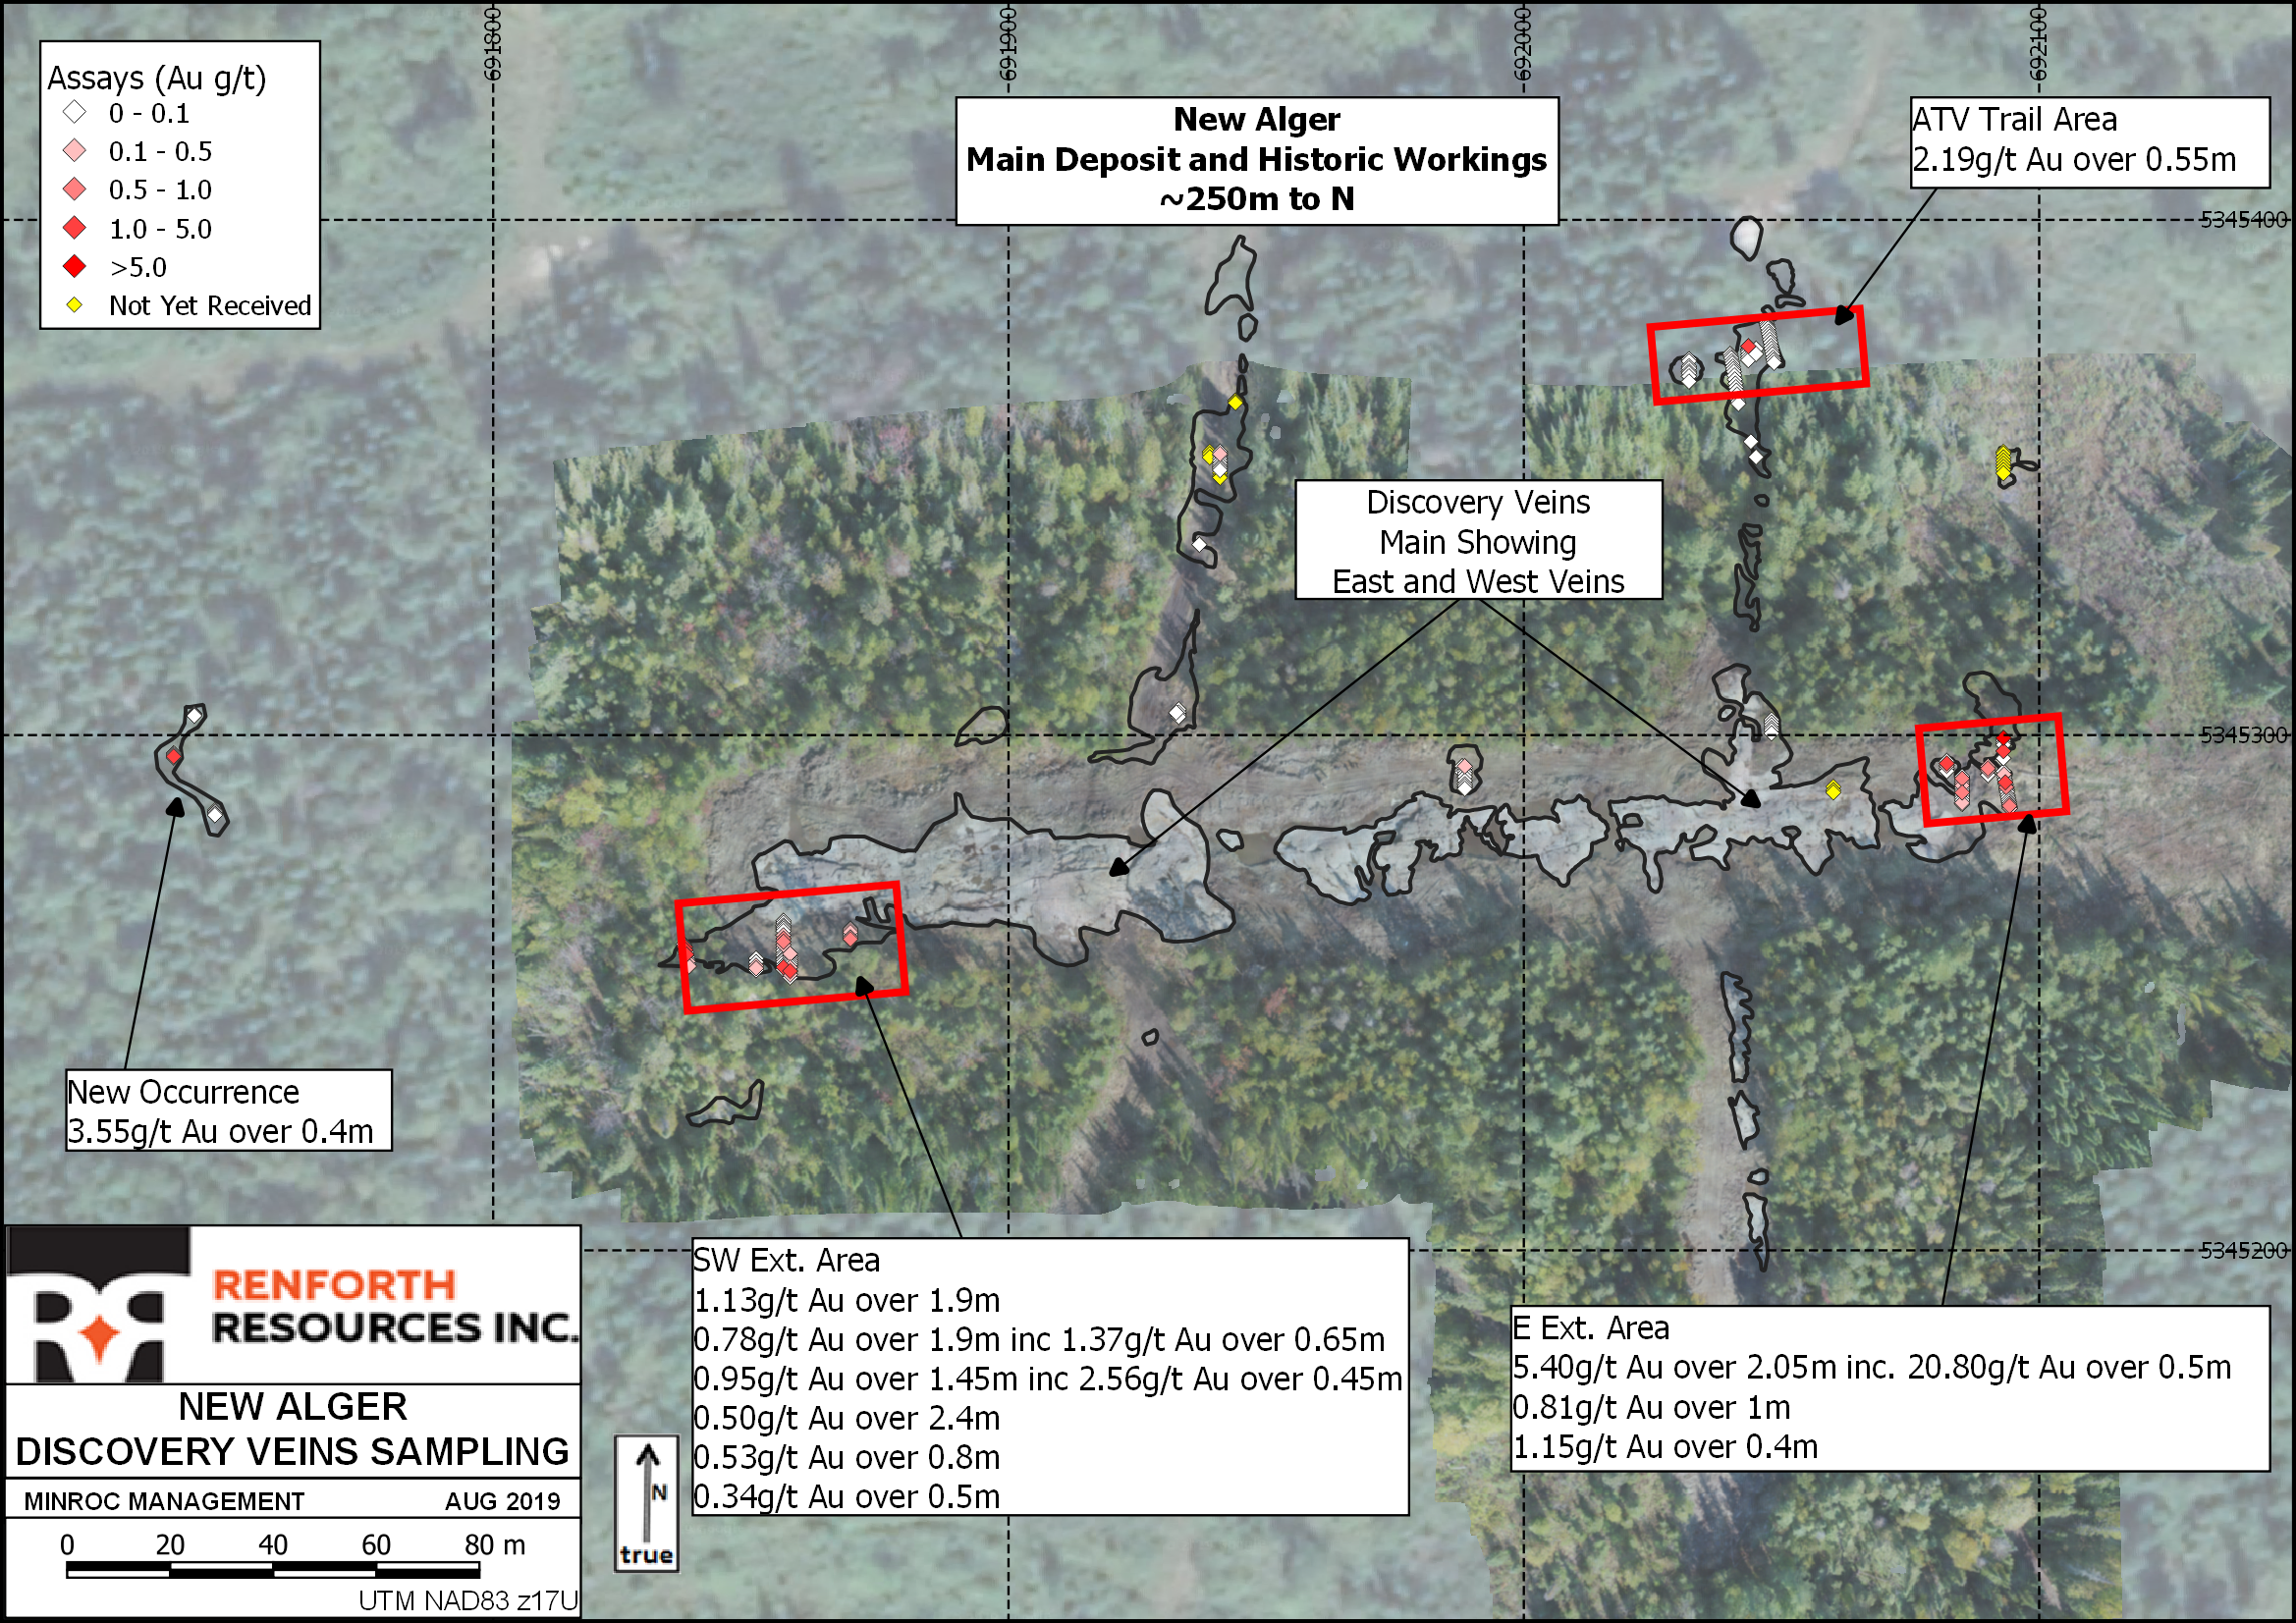 Renforth Resources Inc., Tuesday, August 27, 2019, Press release picture